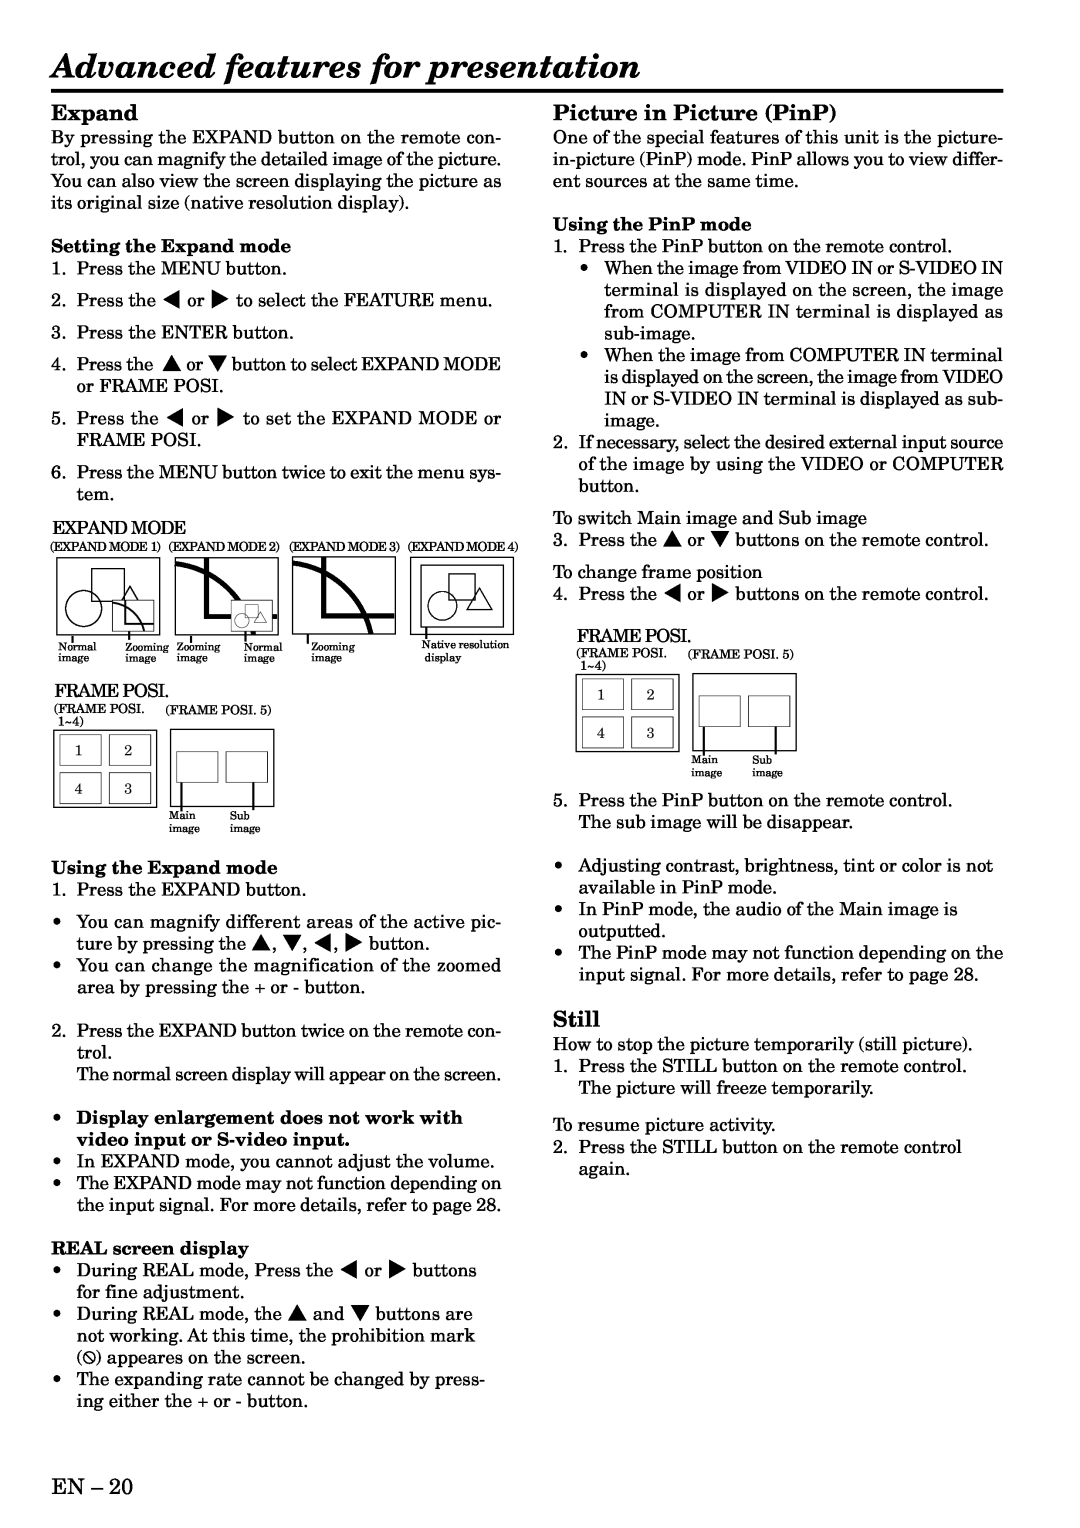 Mitsubishi Electronics XL2U user manual Advanced features for presentation, Expand, Picture in Picture PinP, Still 